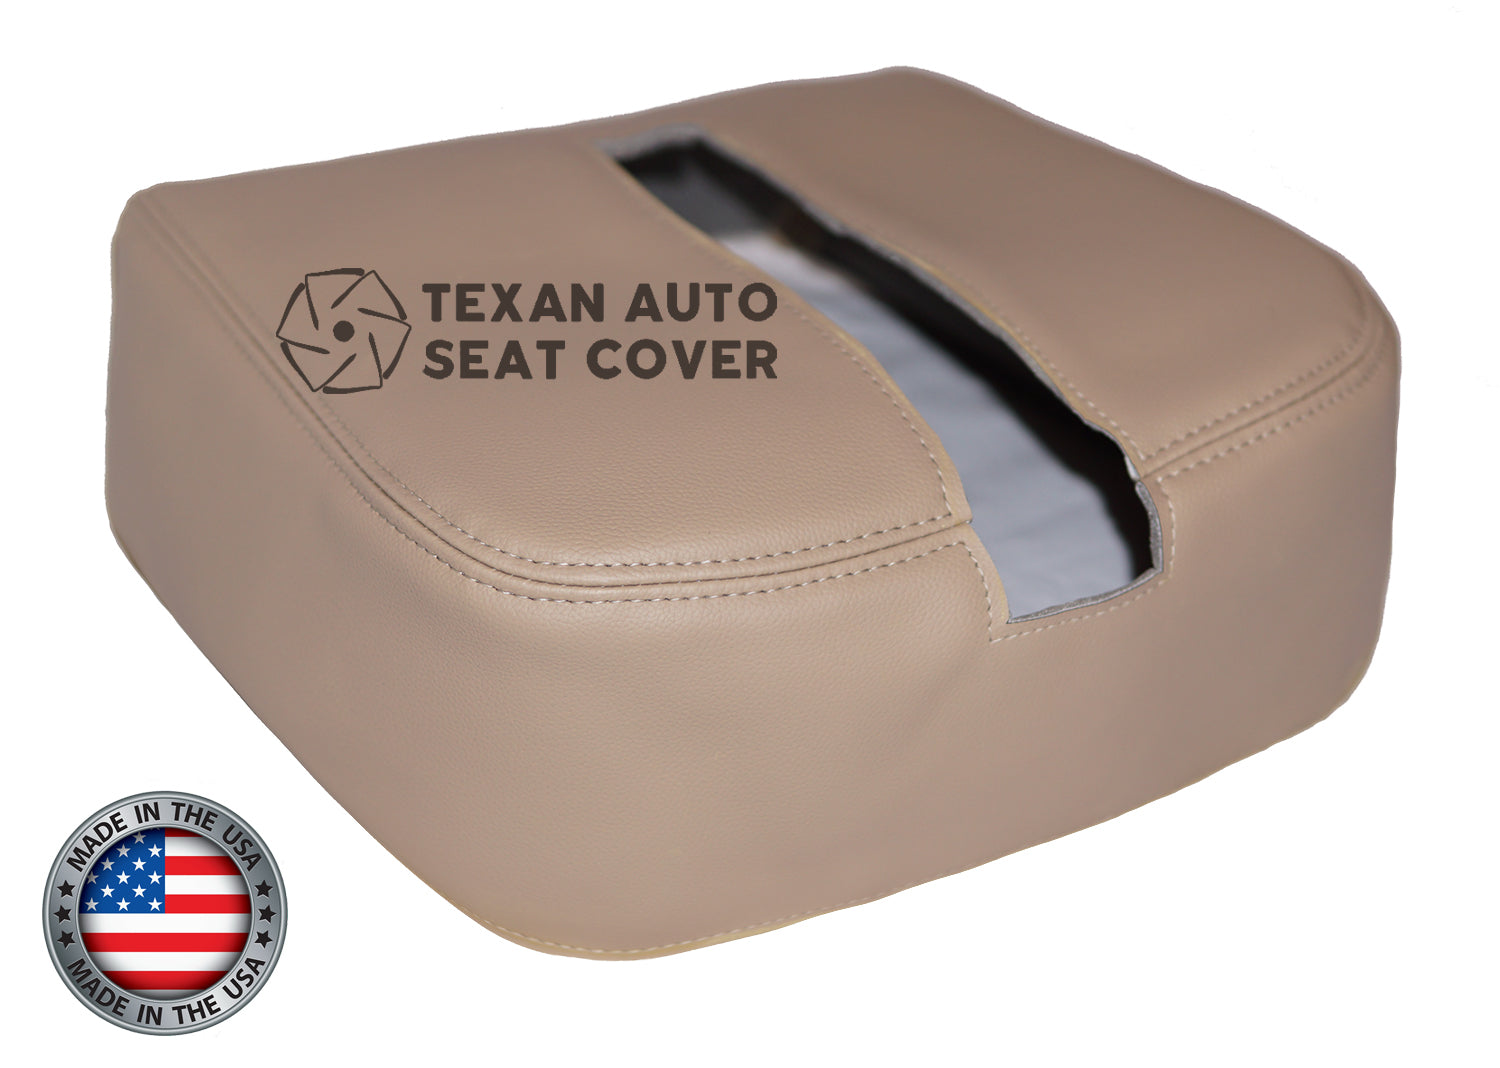 Fits 2007, 2008, 2009, 2020, 2011, 2012, 2013 Chevy Avalanche Center Console Replacement Cover Tan